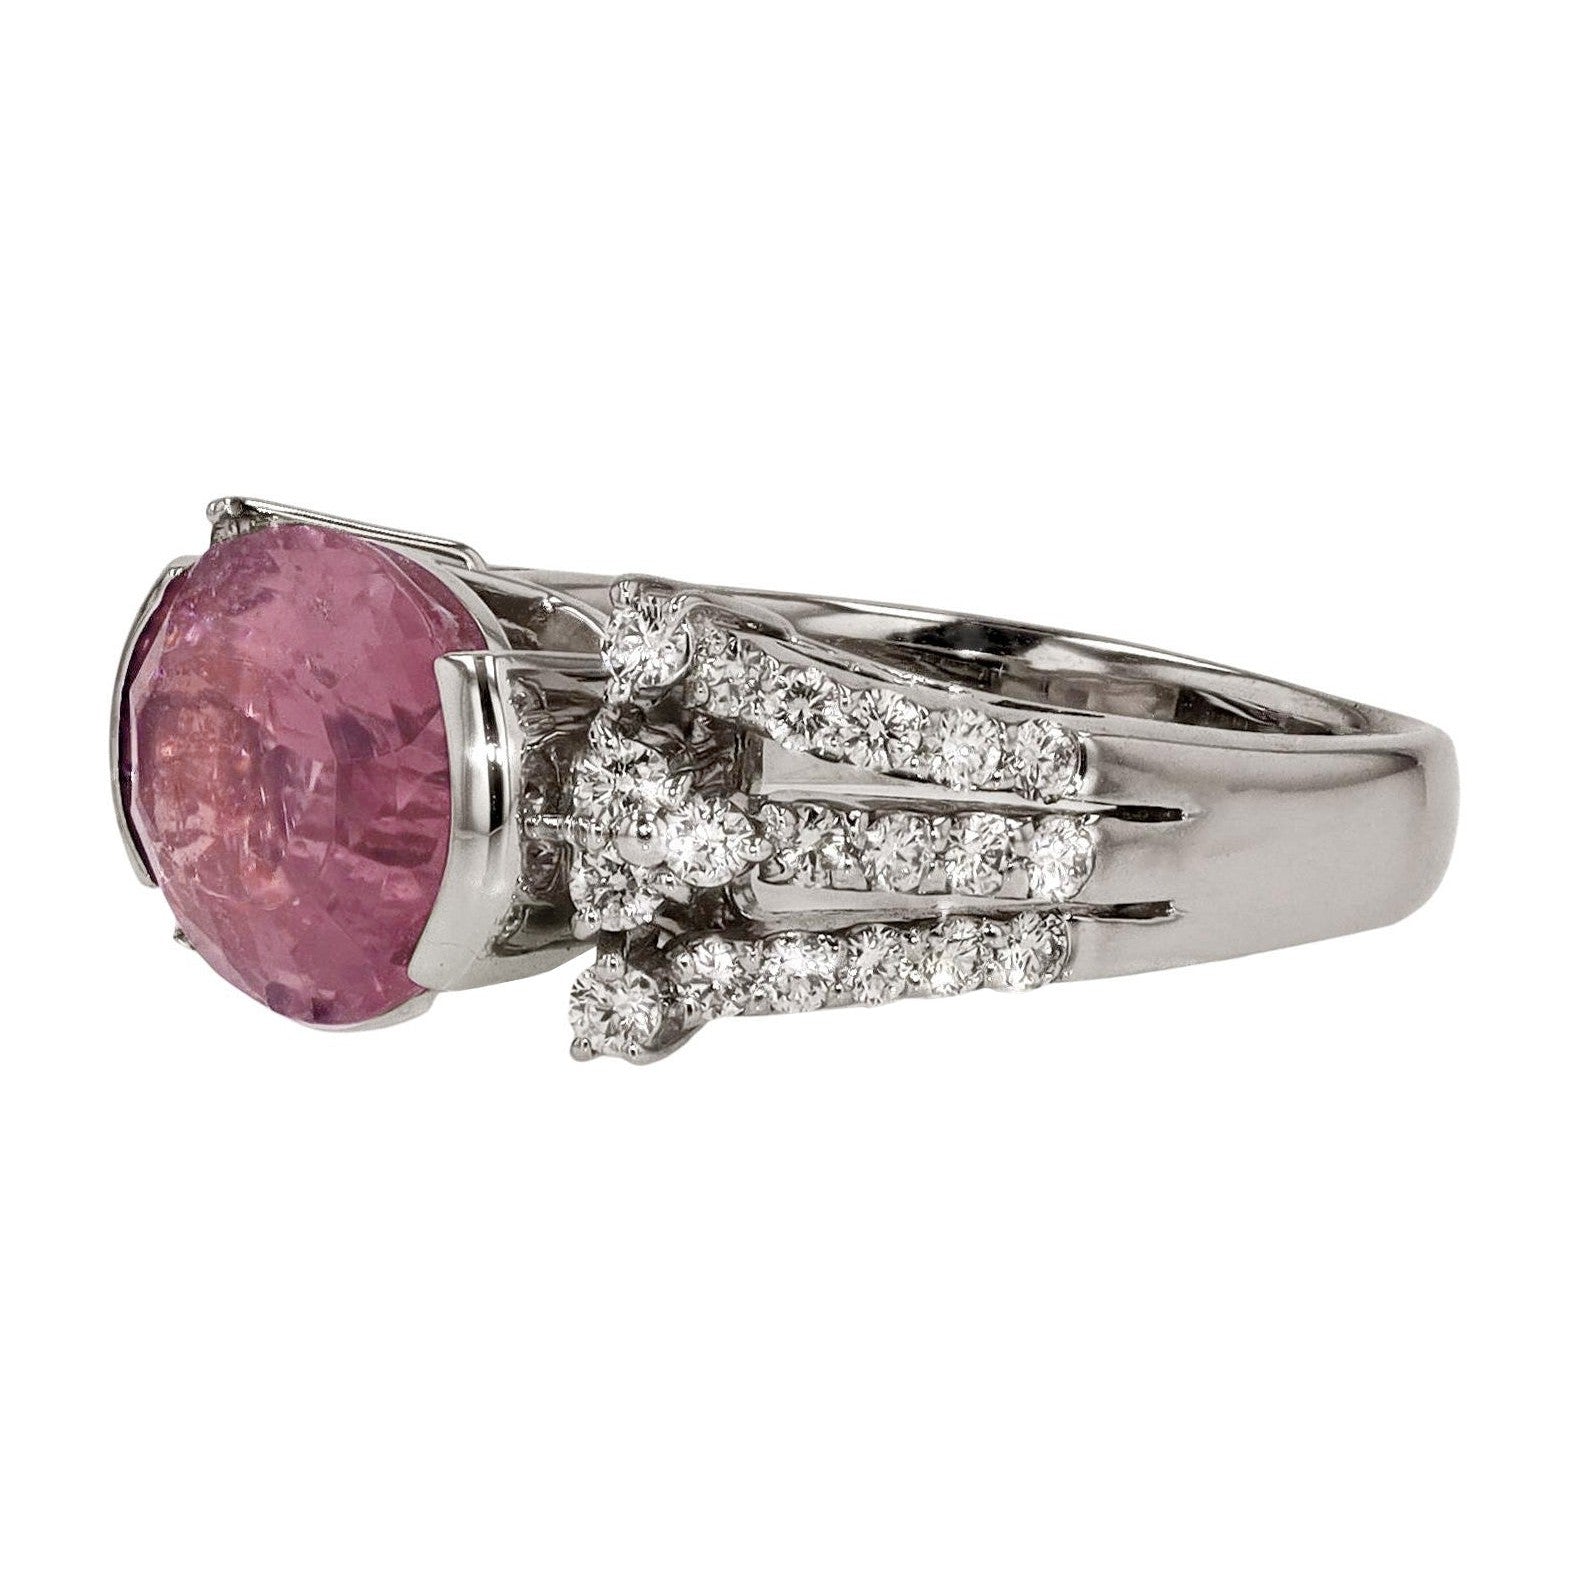 East West 6.90 Carat Pink Tourmaline and Diamond Ring